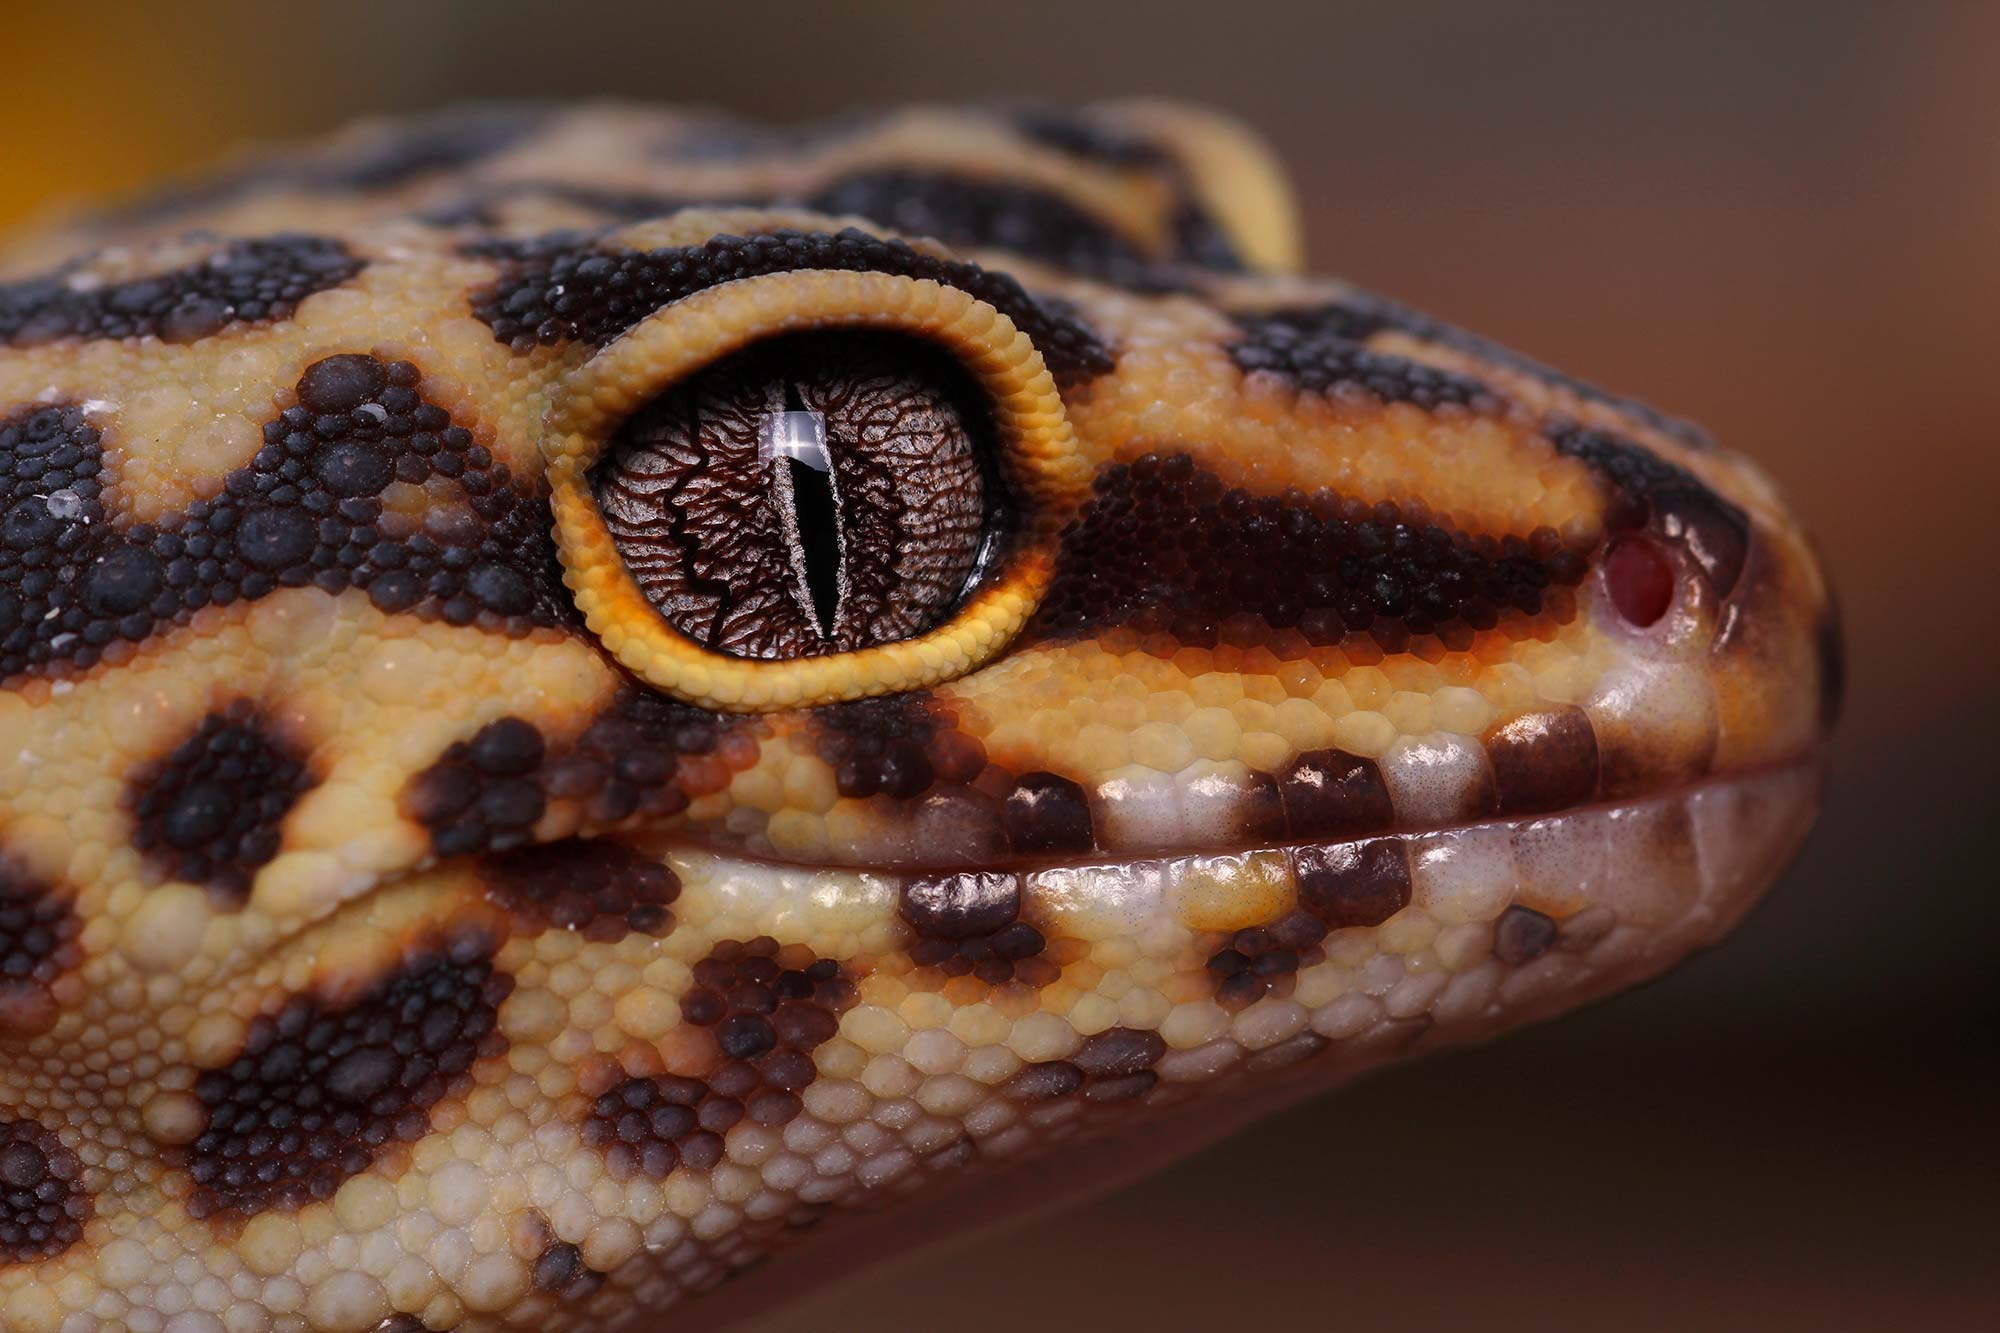 Leopard Gecko by 17-year-old Jack Olive